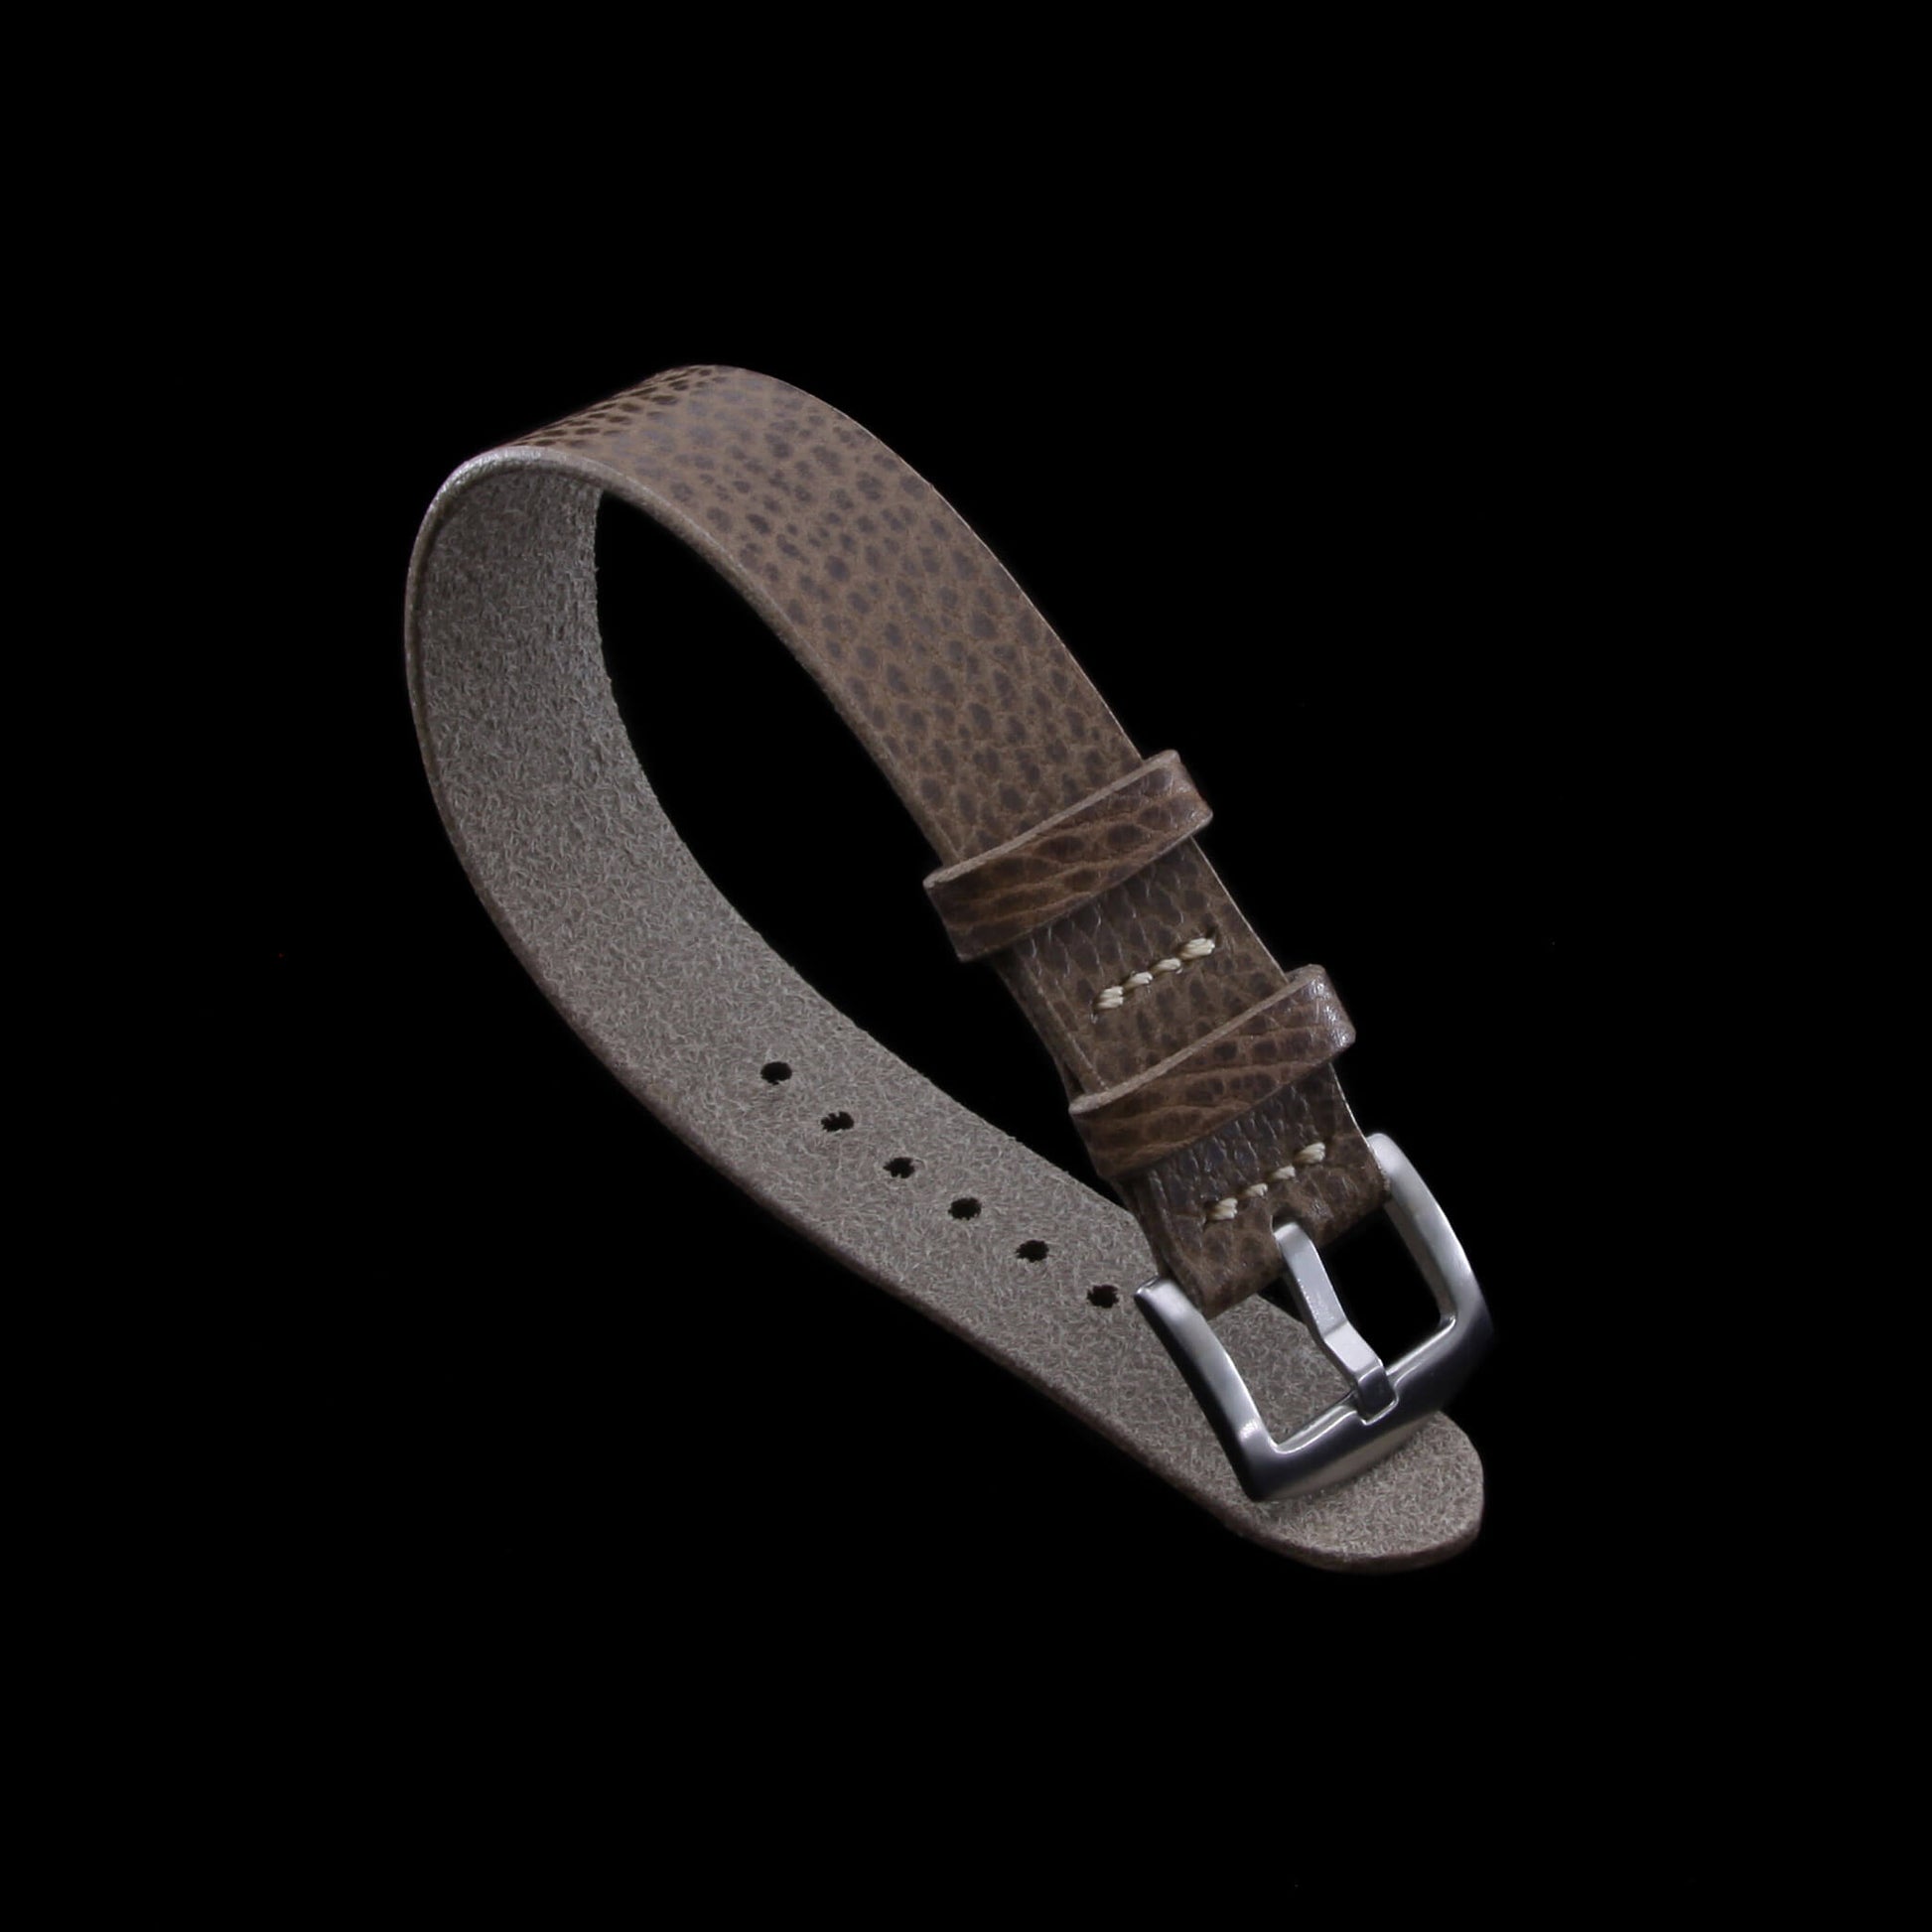 2nd View of single Pass Leather Watch Strap, 2-Keeper Buttero Taupe, made with full grain Italian veg-tanned leather by Cozy Handmade